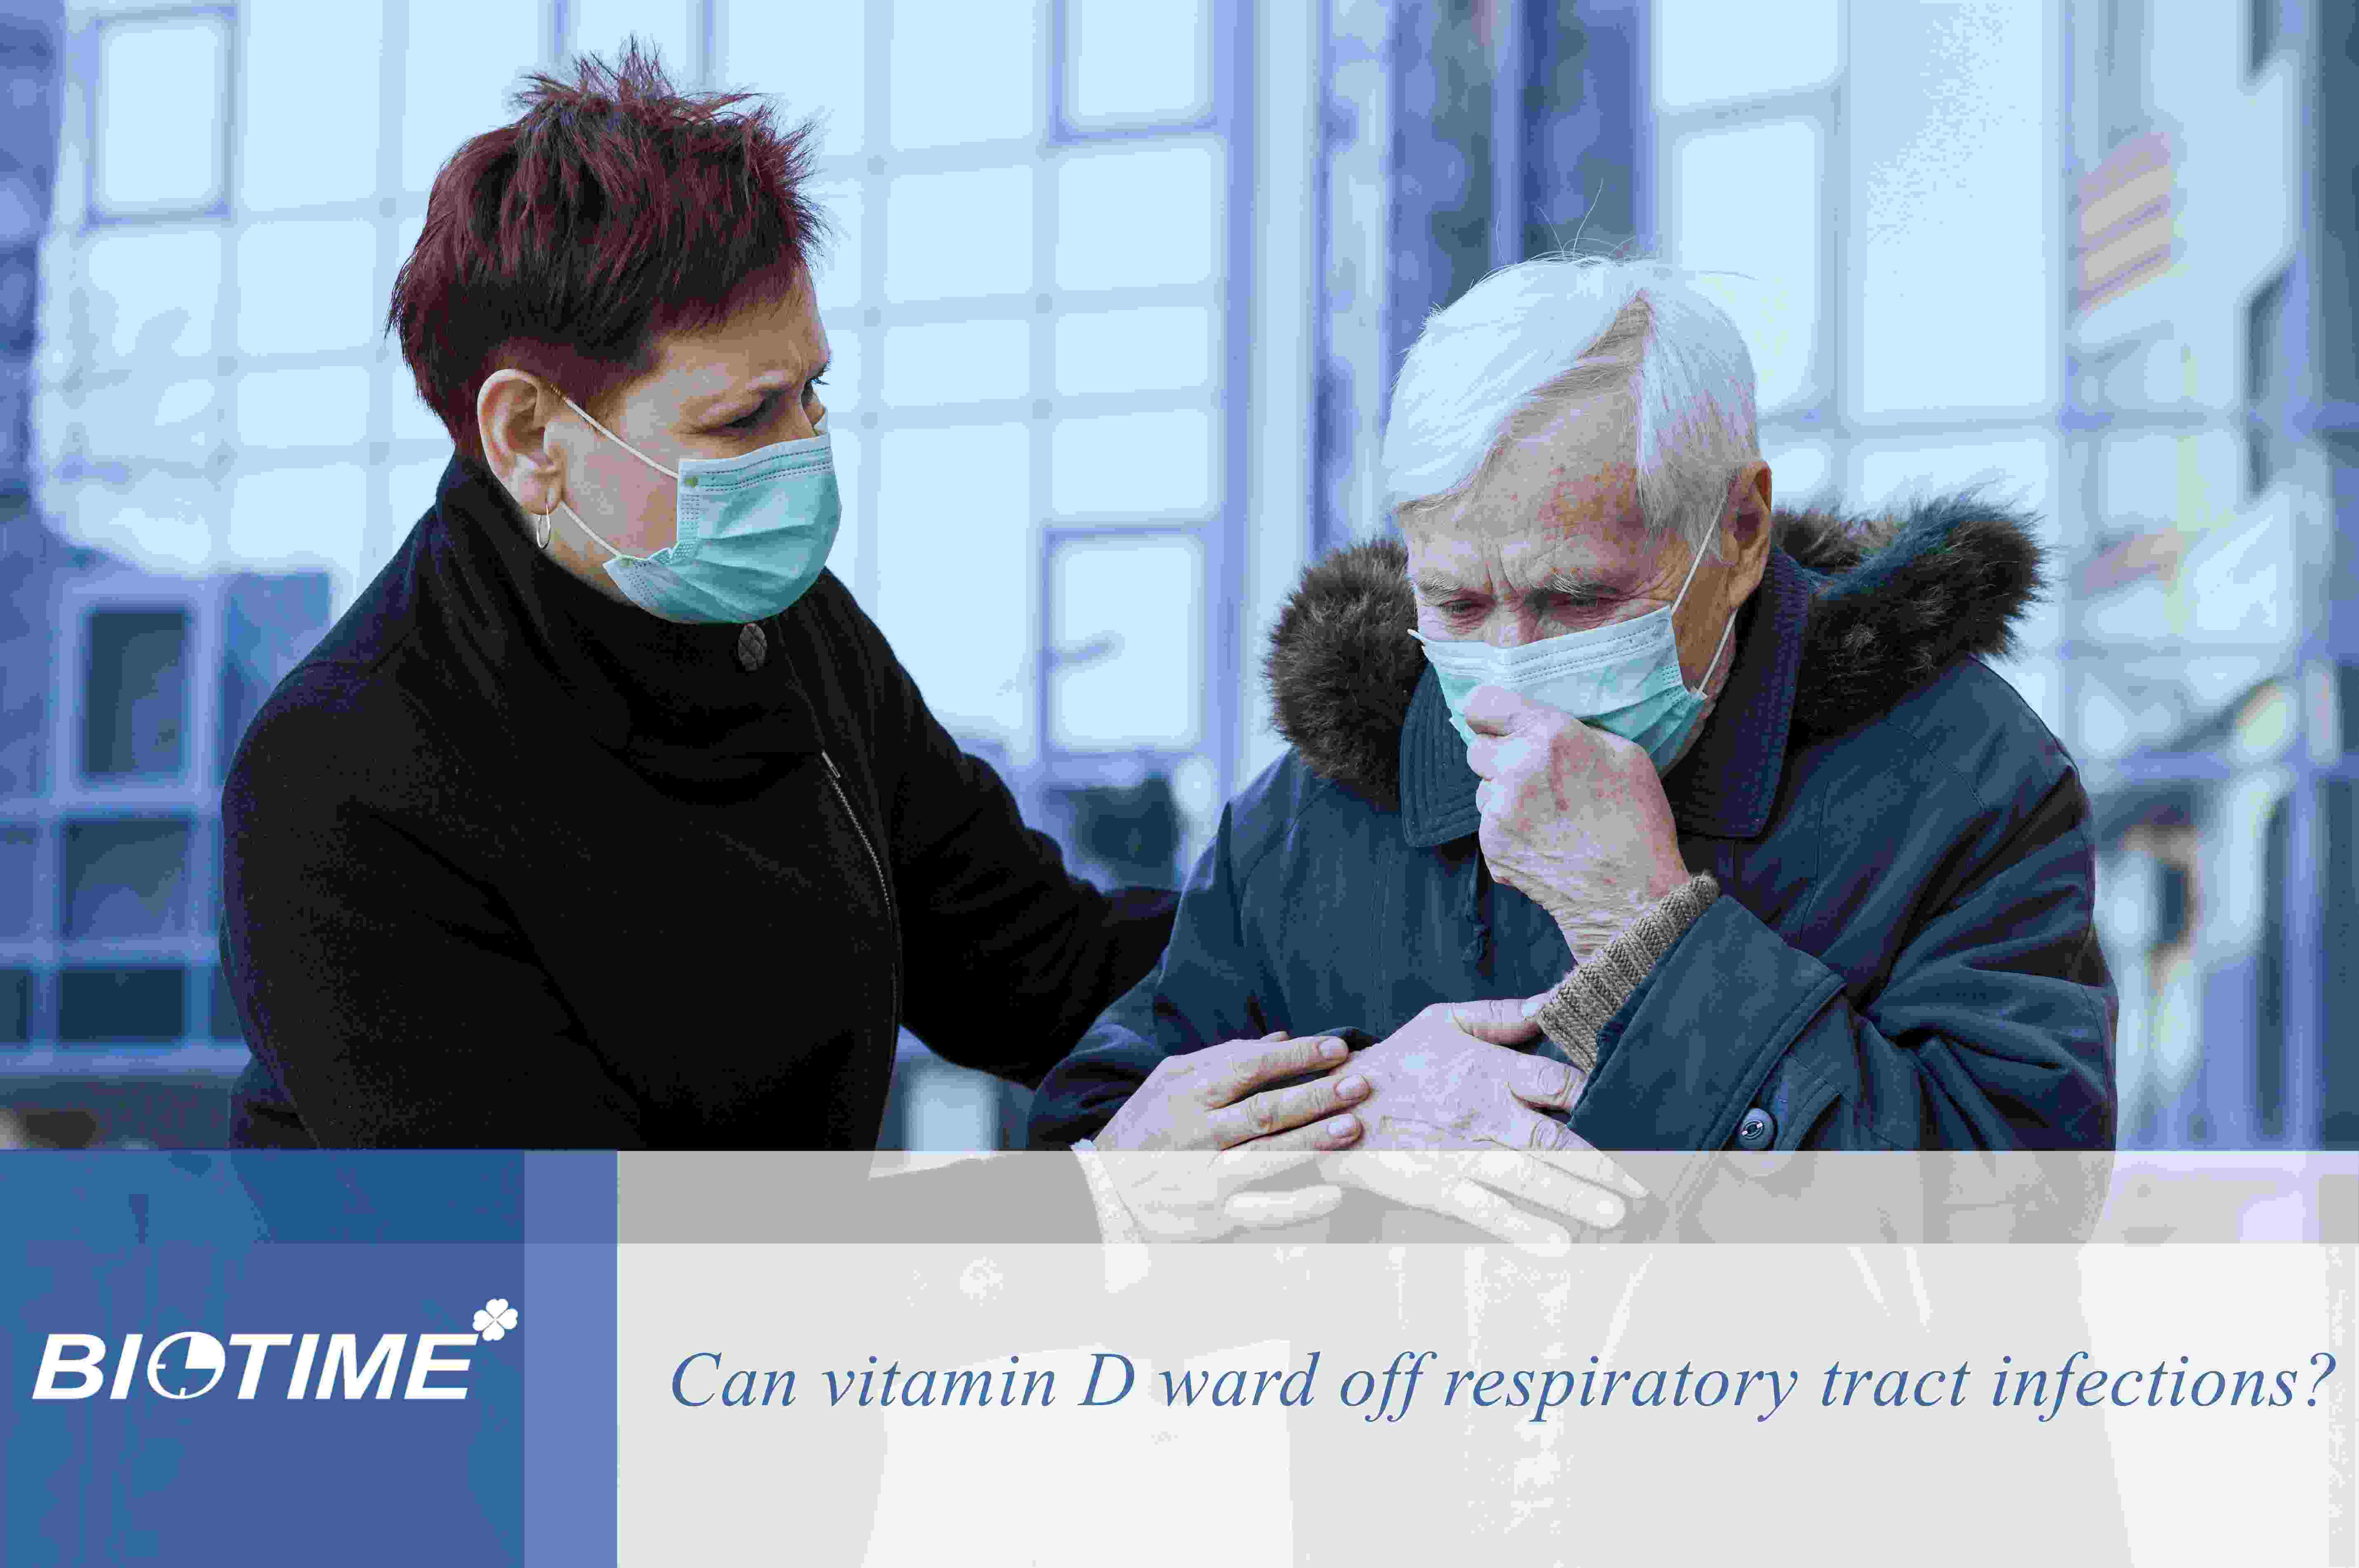 Can vitamin D ward off respiratory tract infections?